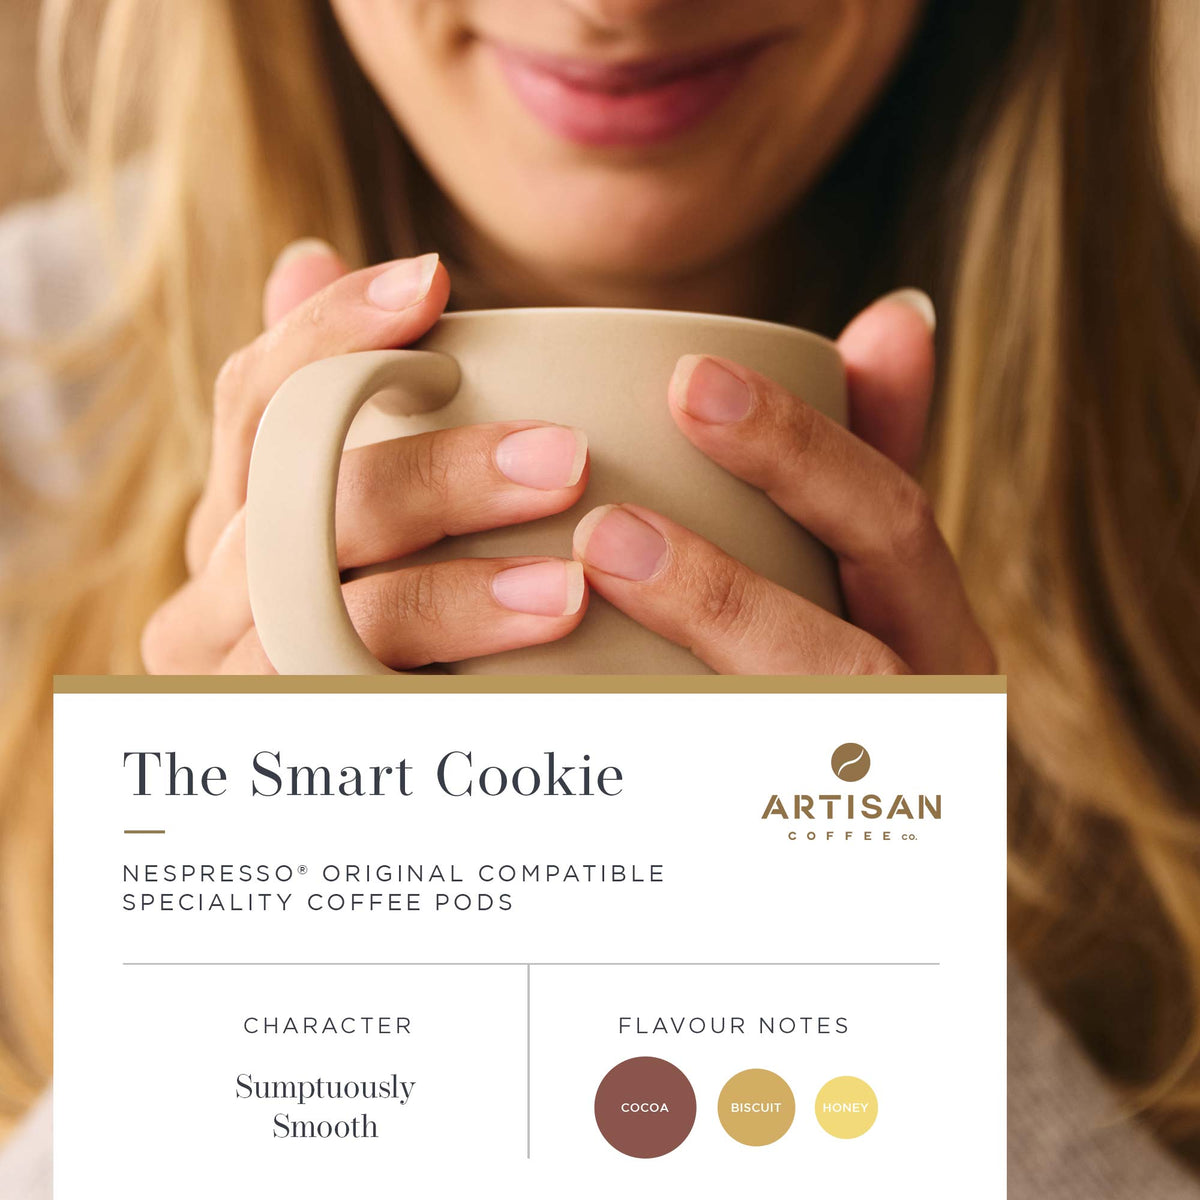 Artisan Coffee Co The Smart Cookie pods Infographic Flavour notes